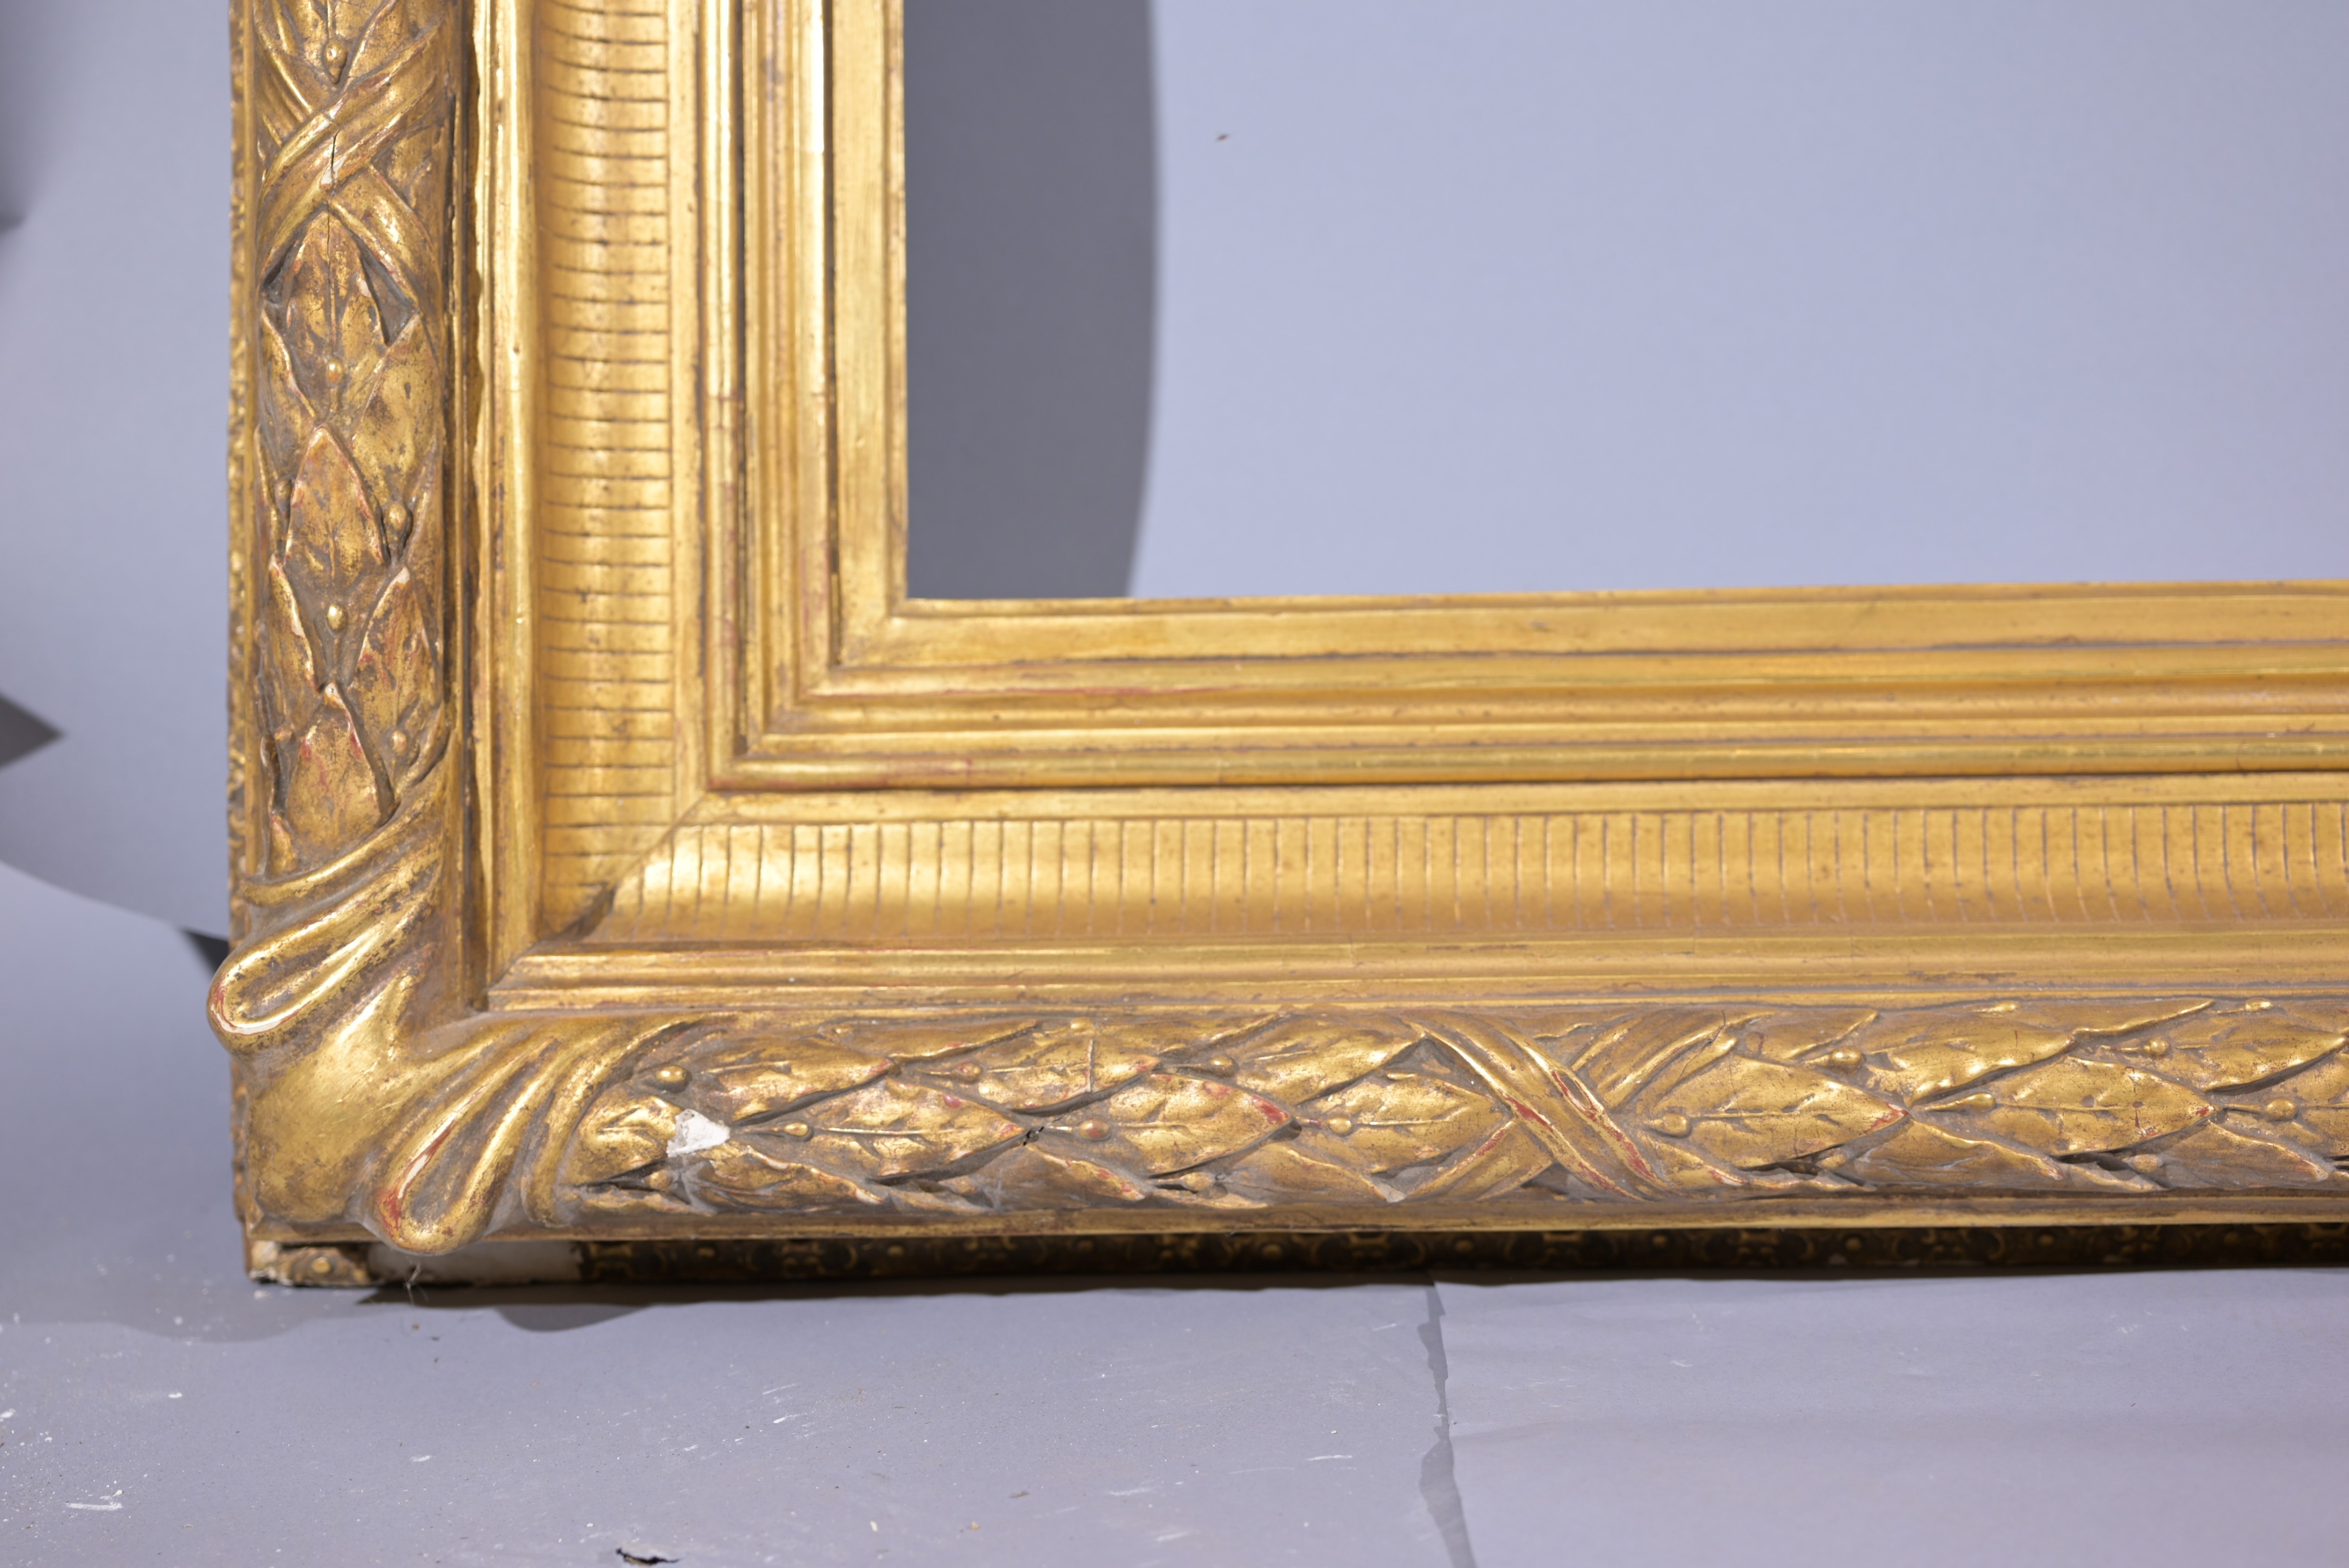 Large 19th C. Gilt/Fluted Cove Frame - 45.5 x 34.5 - Image 6 of 7